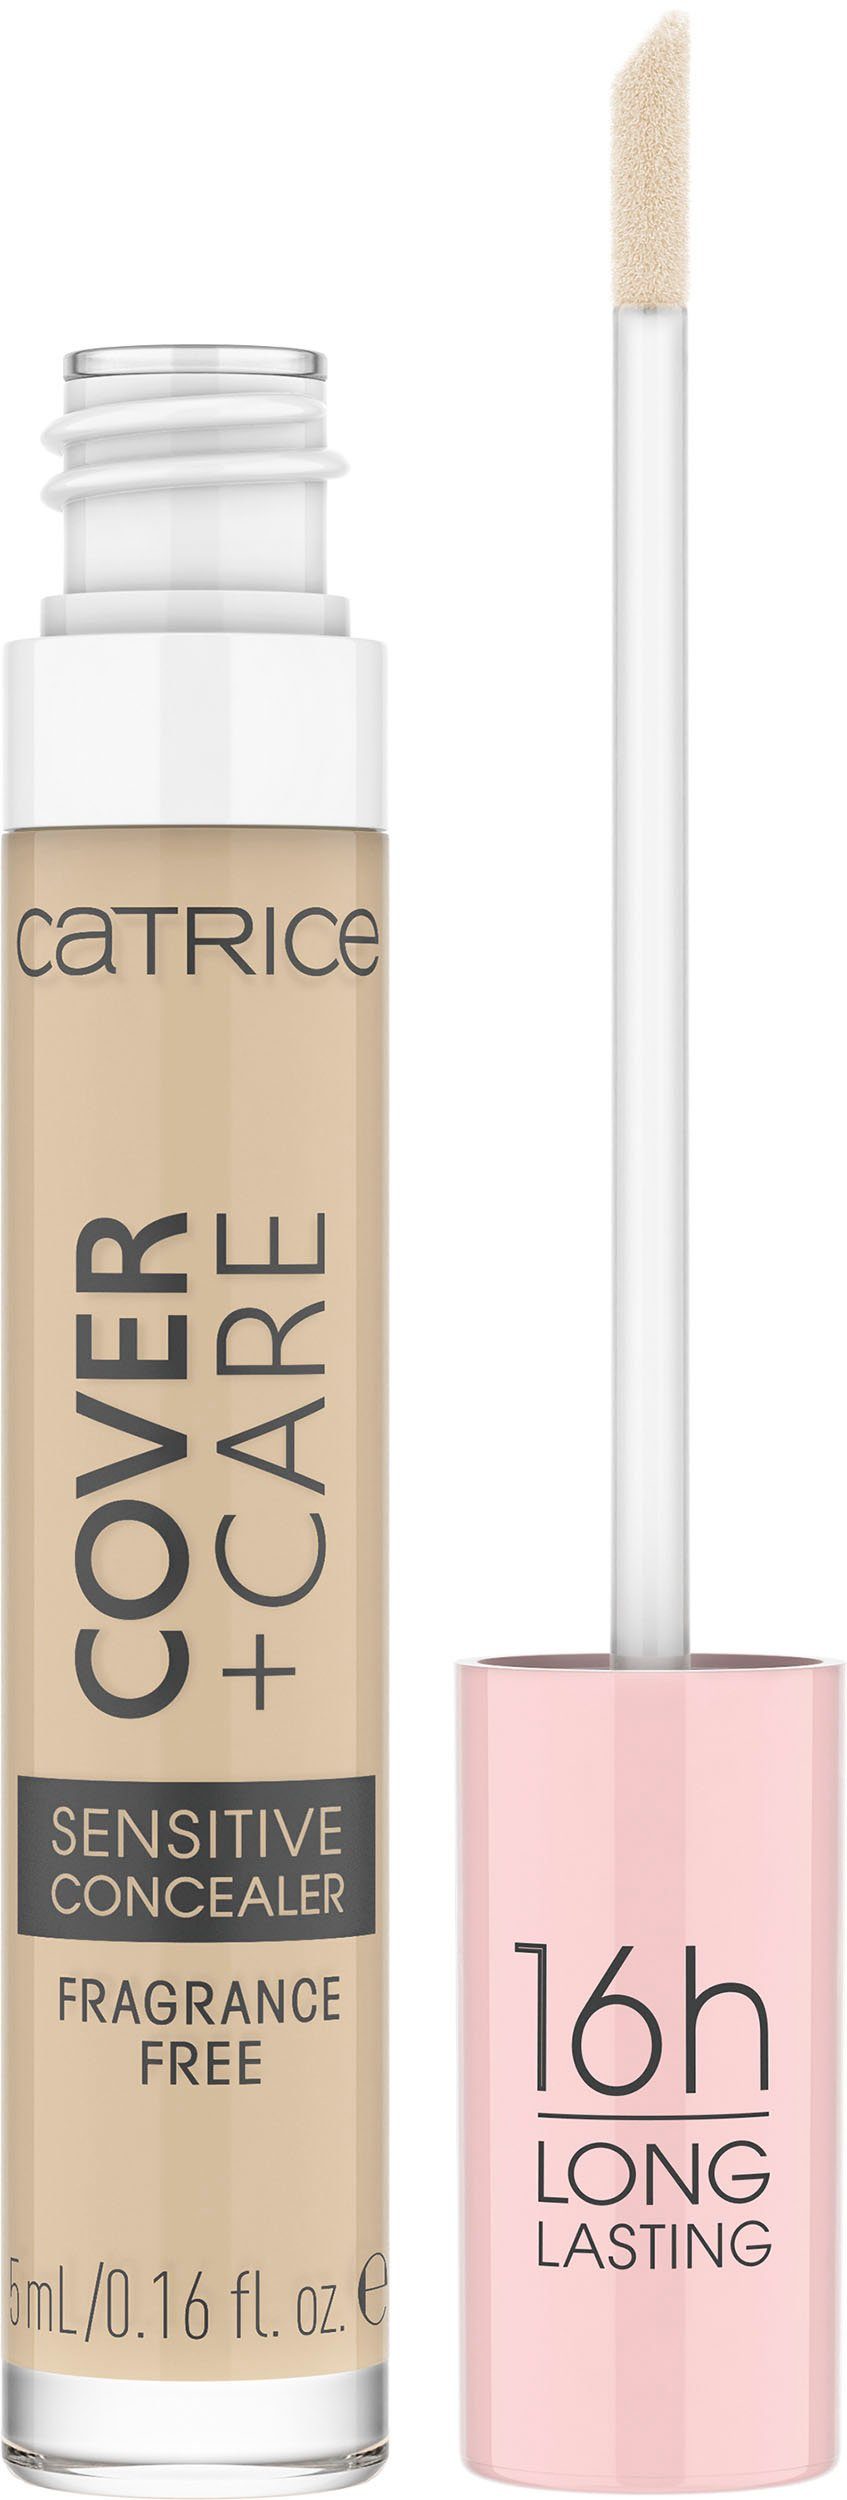 Catrice Concealer Catrice Care Concealer, 3-tlg. nude + Sensitive 002N Cover